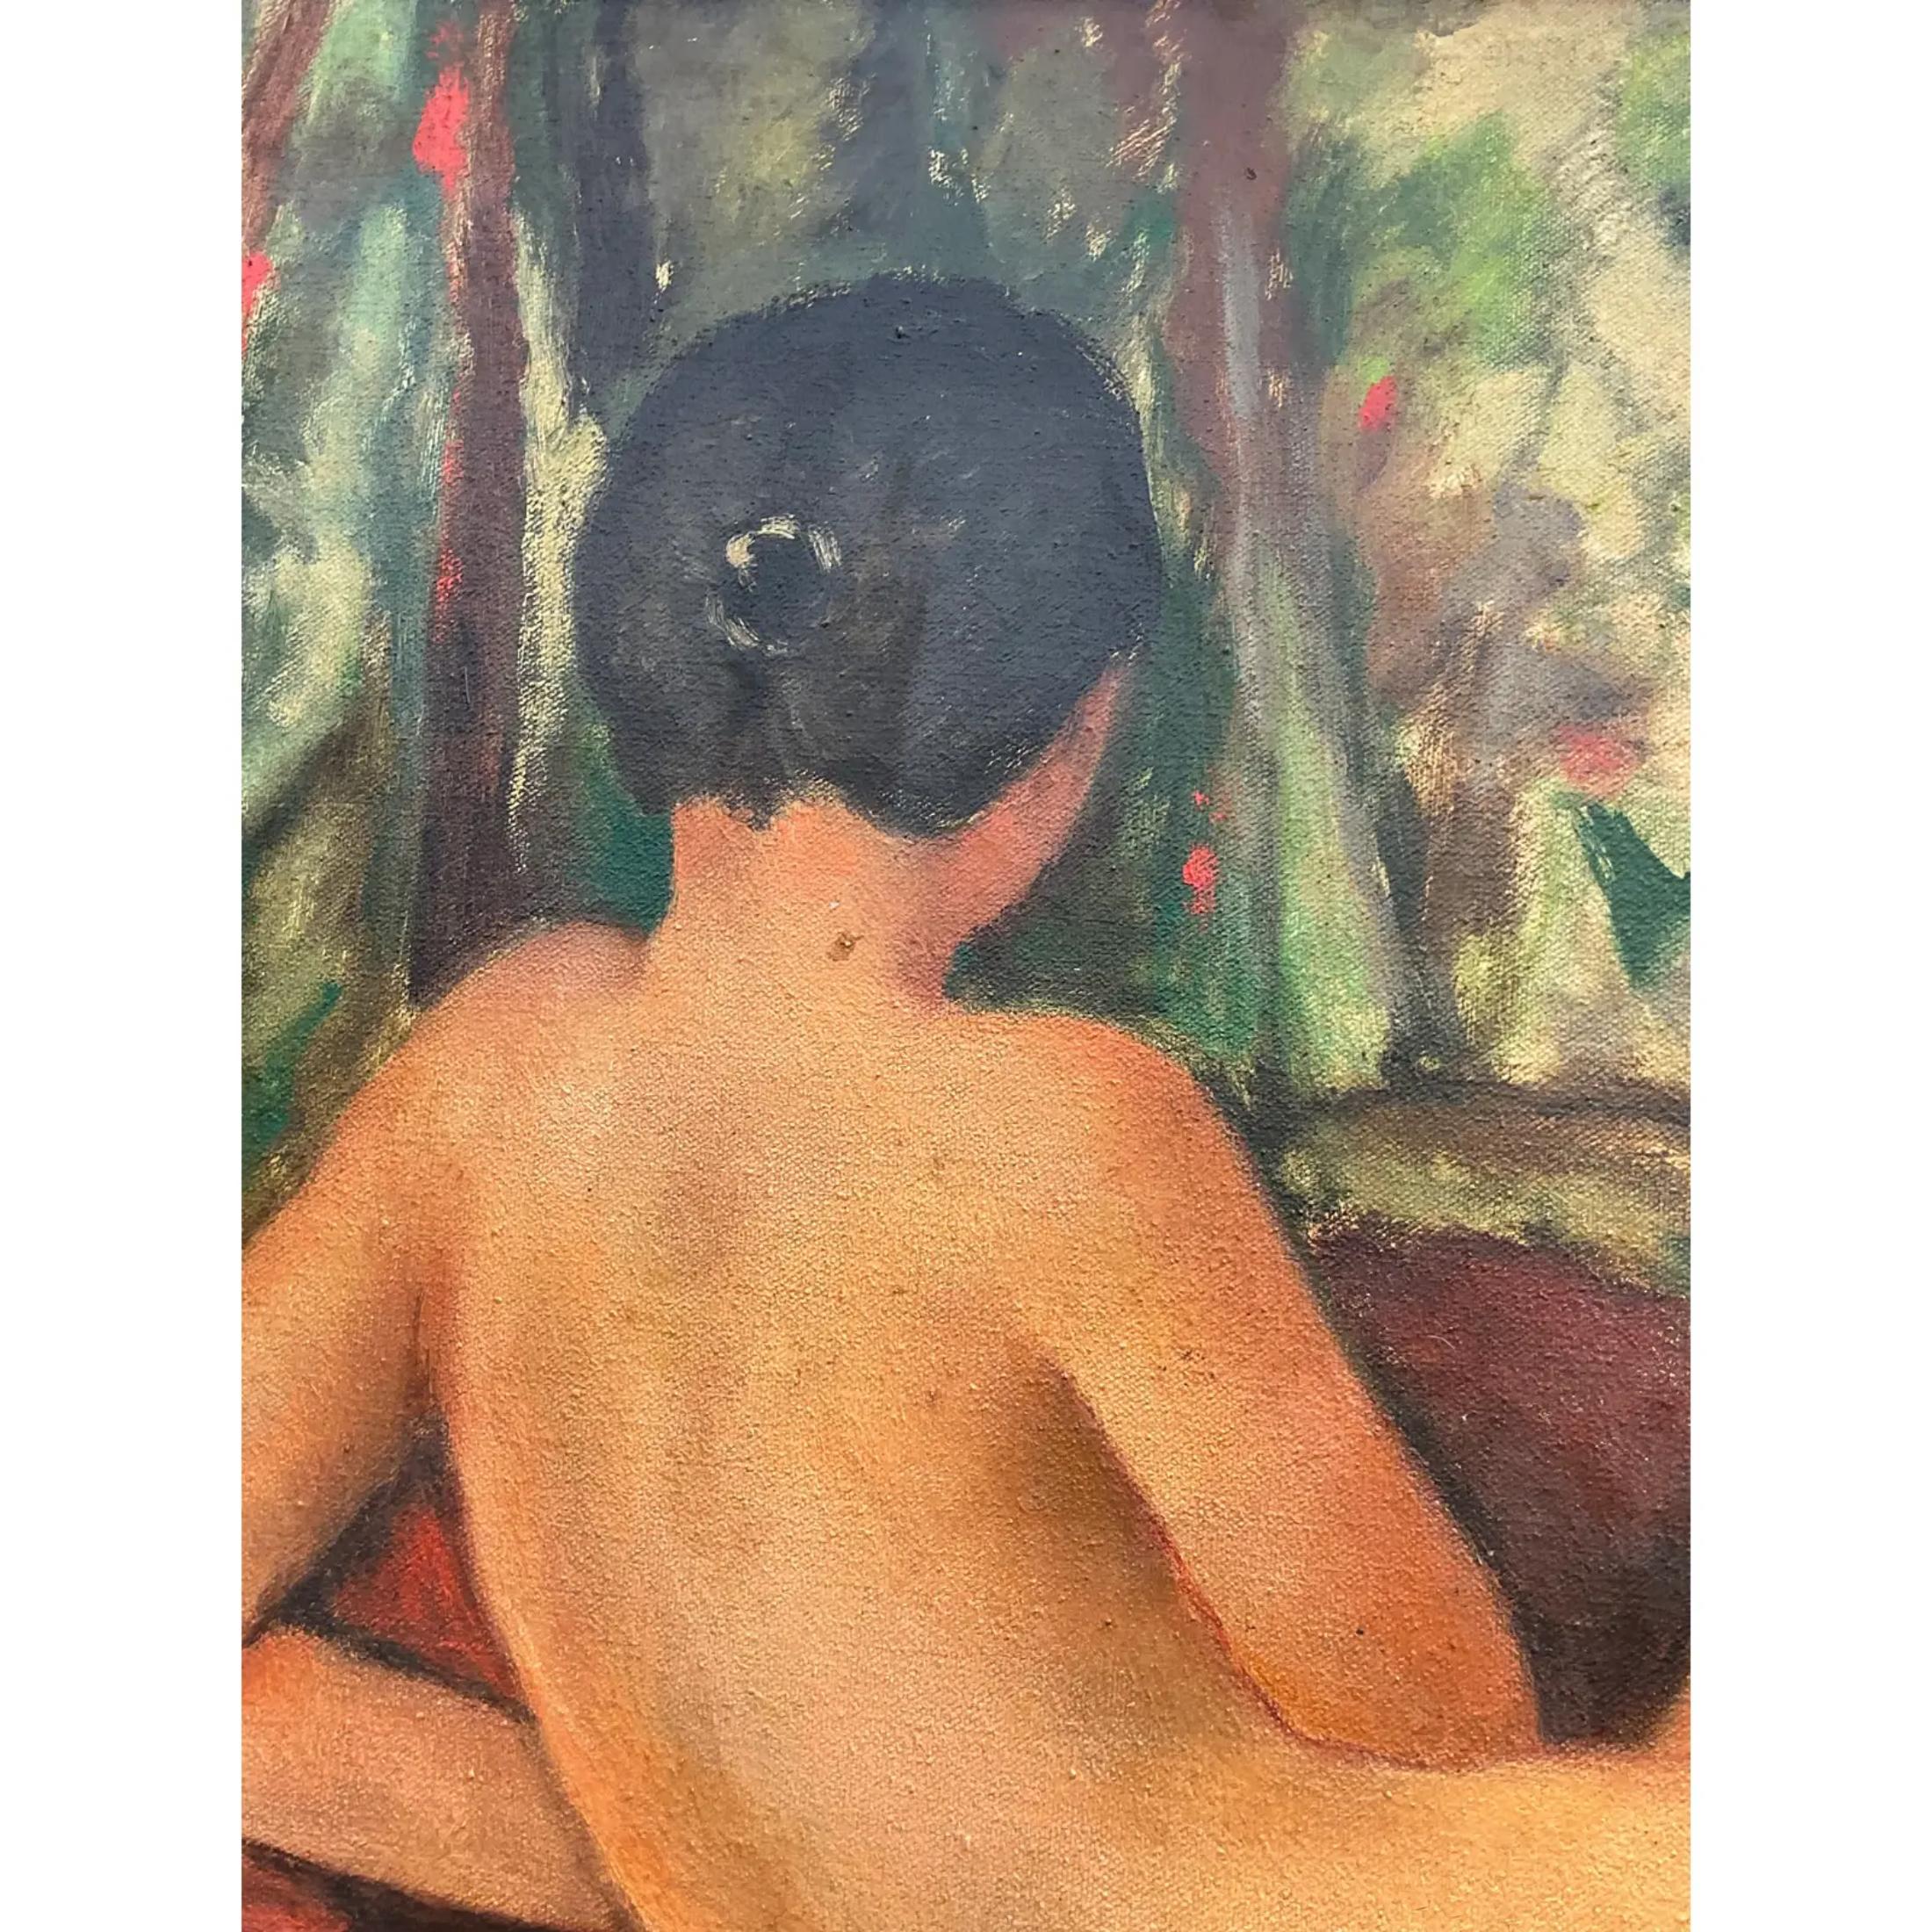 A striking vintage original oil painting on canvas. A gorgeous female nude in a quiet reclining pose. Deep rich colors dominate this composition. Signed by the artist. Acquired from a Palm Beach estate